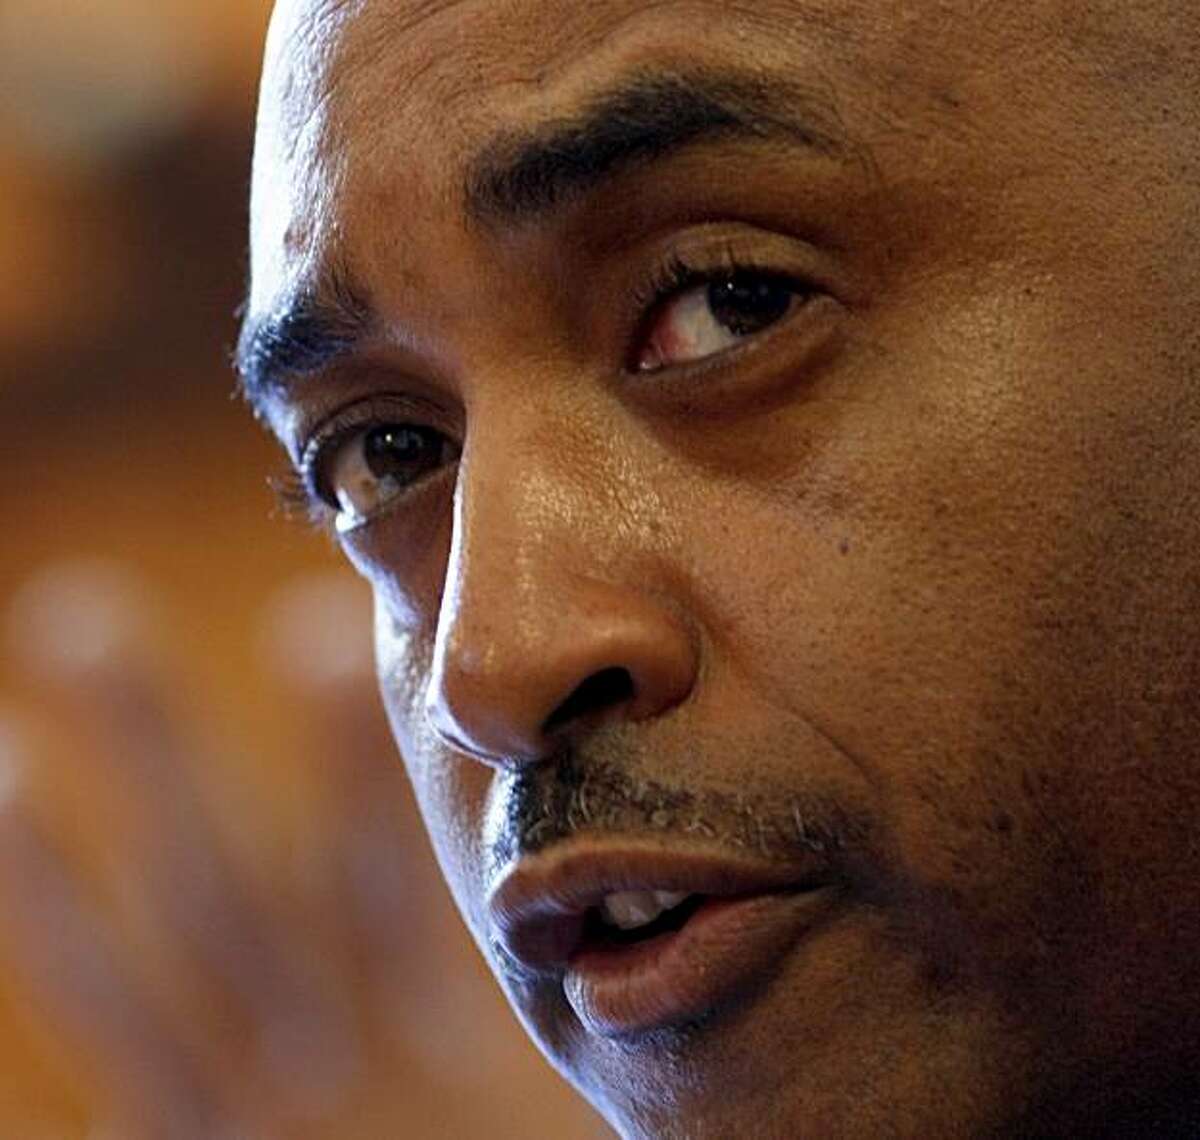 The new Chief of Police Anthony Batts answers questions during a press conference, Monday August 17, 2009, in Oakland, Calif.